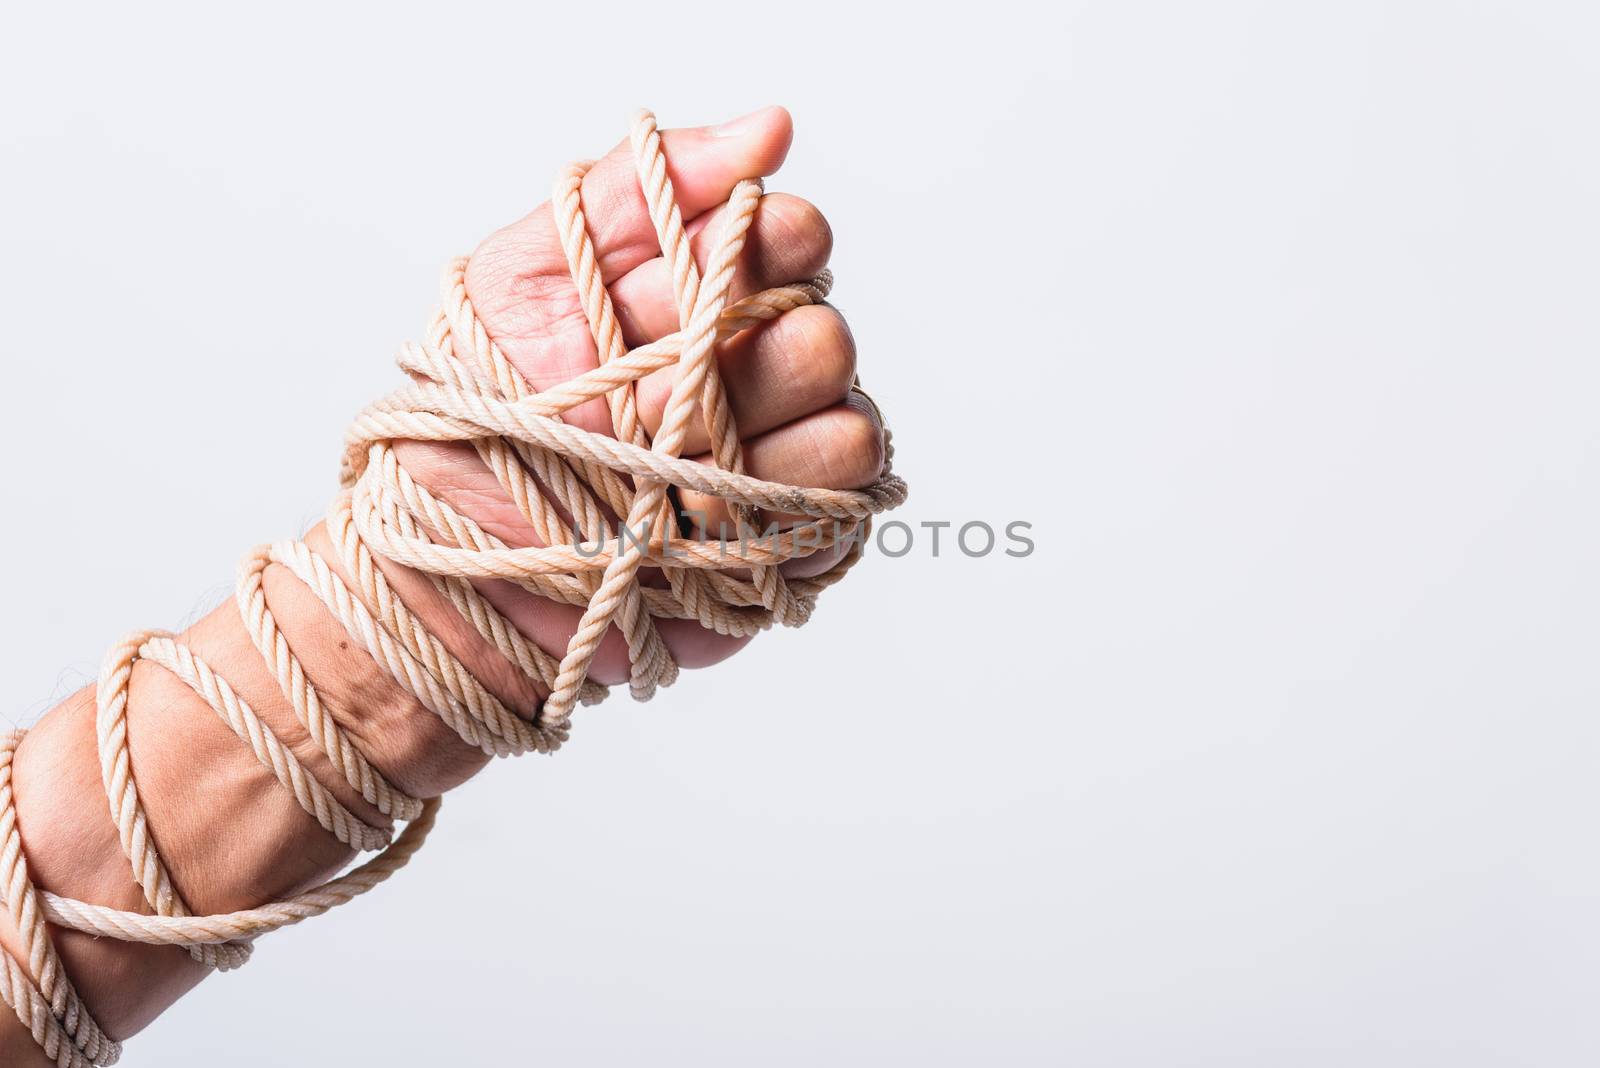 Rope on fist hand on white background, Human rights day concept with copy space for use